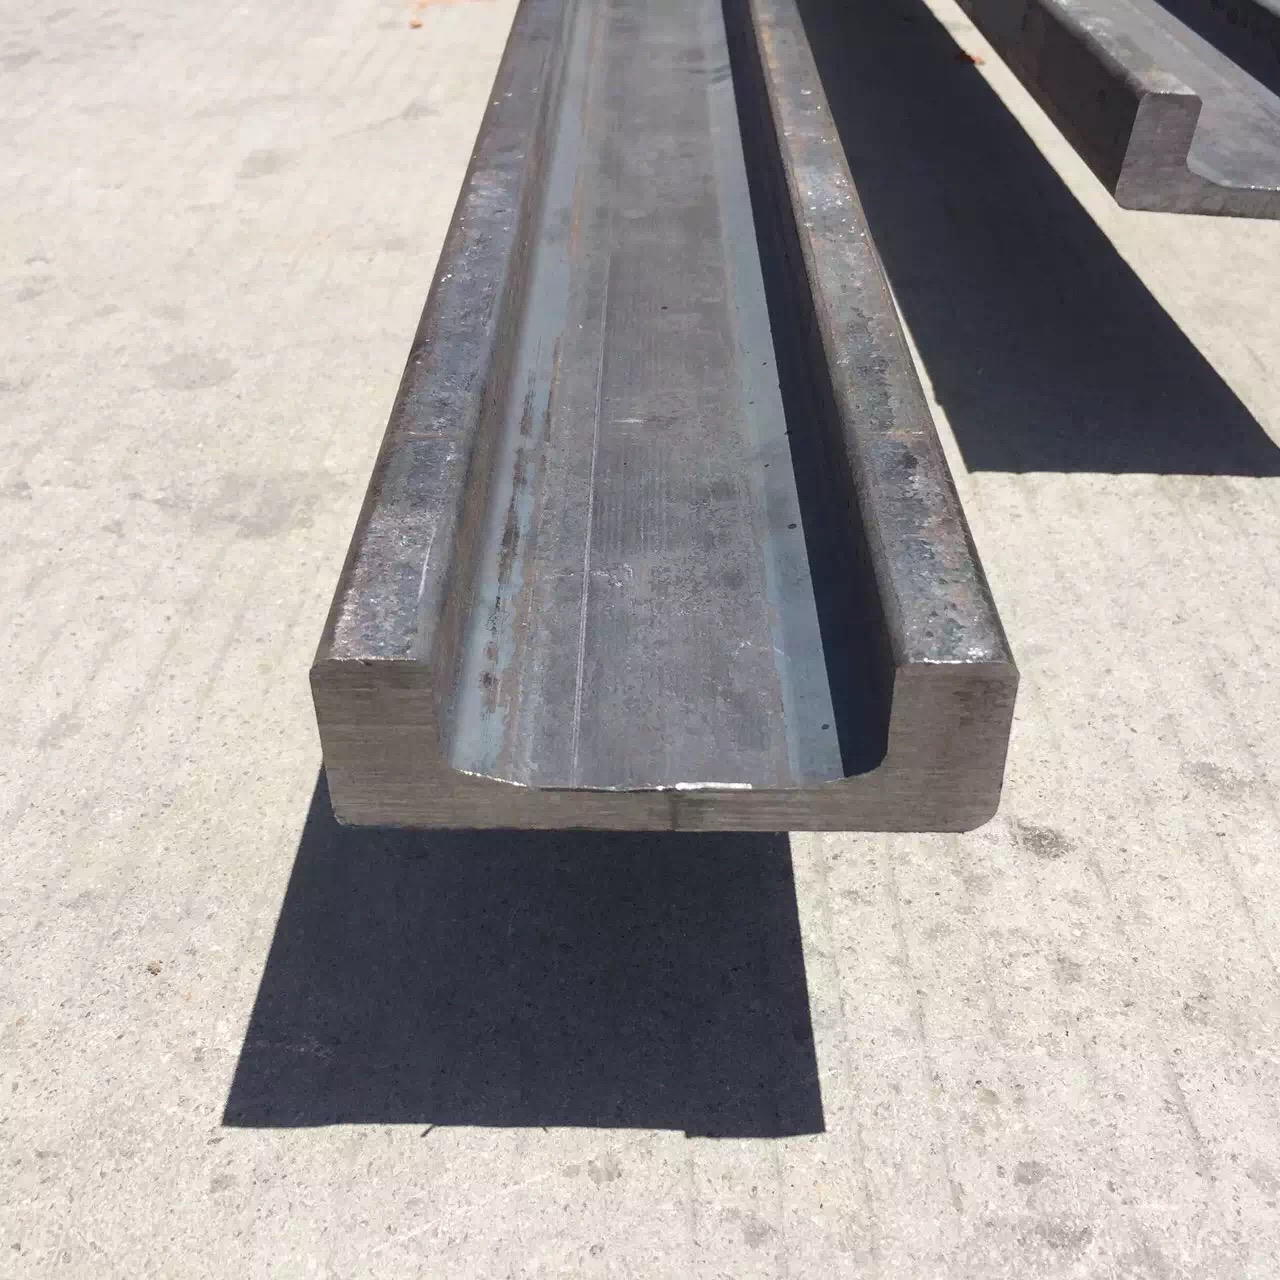 C45 hot rolled carbon steel channel profile - Buy channel profile